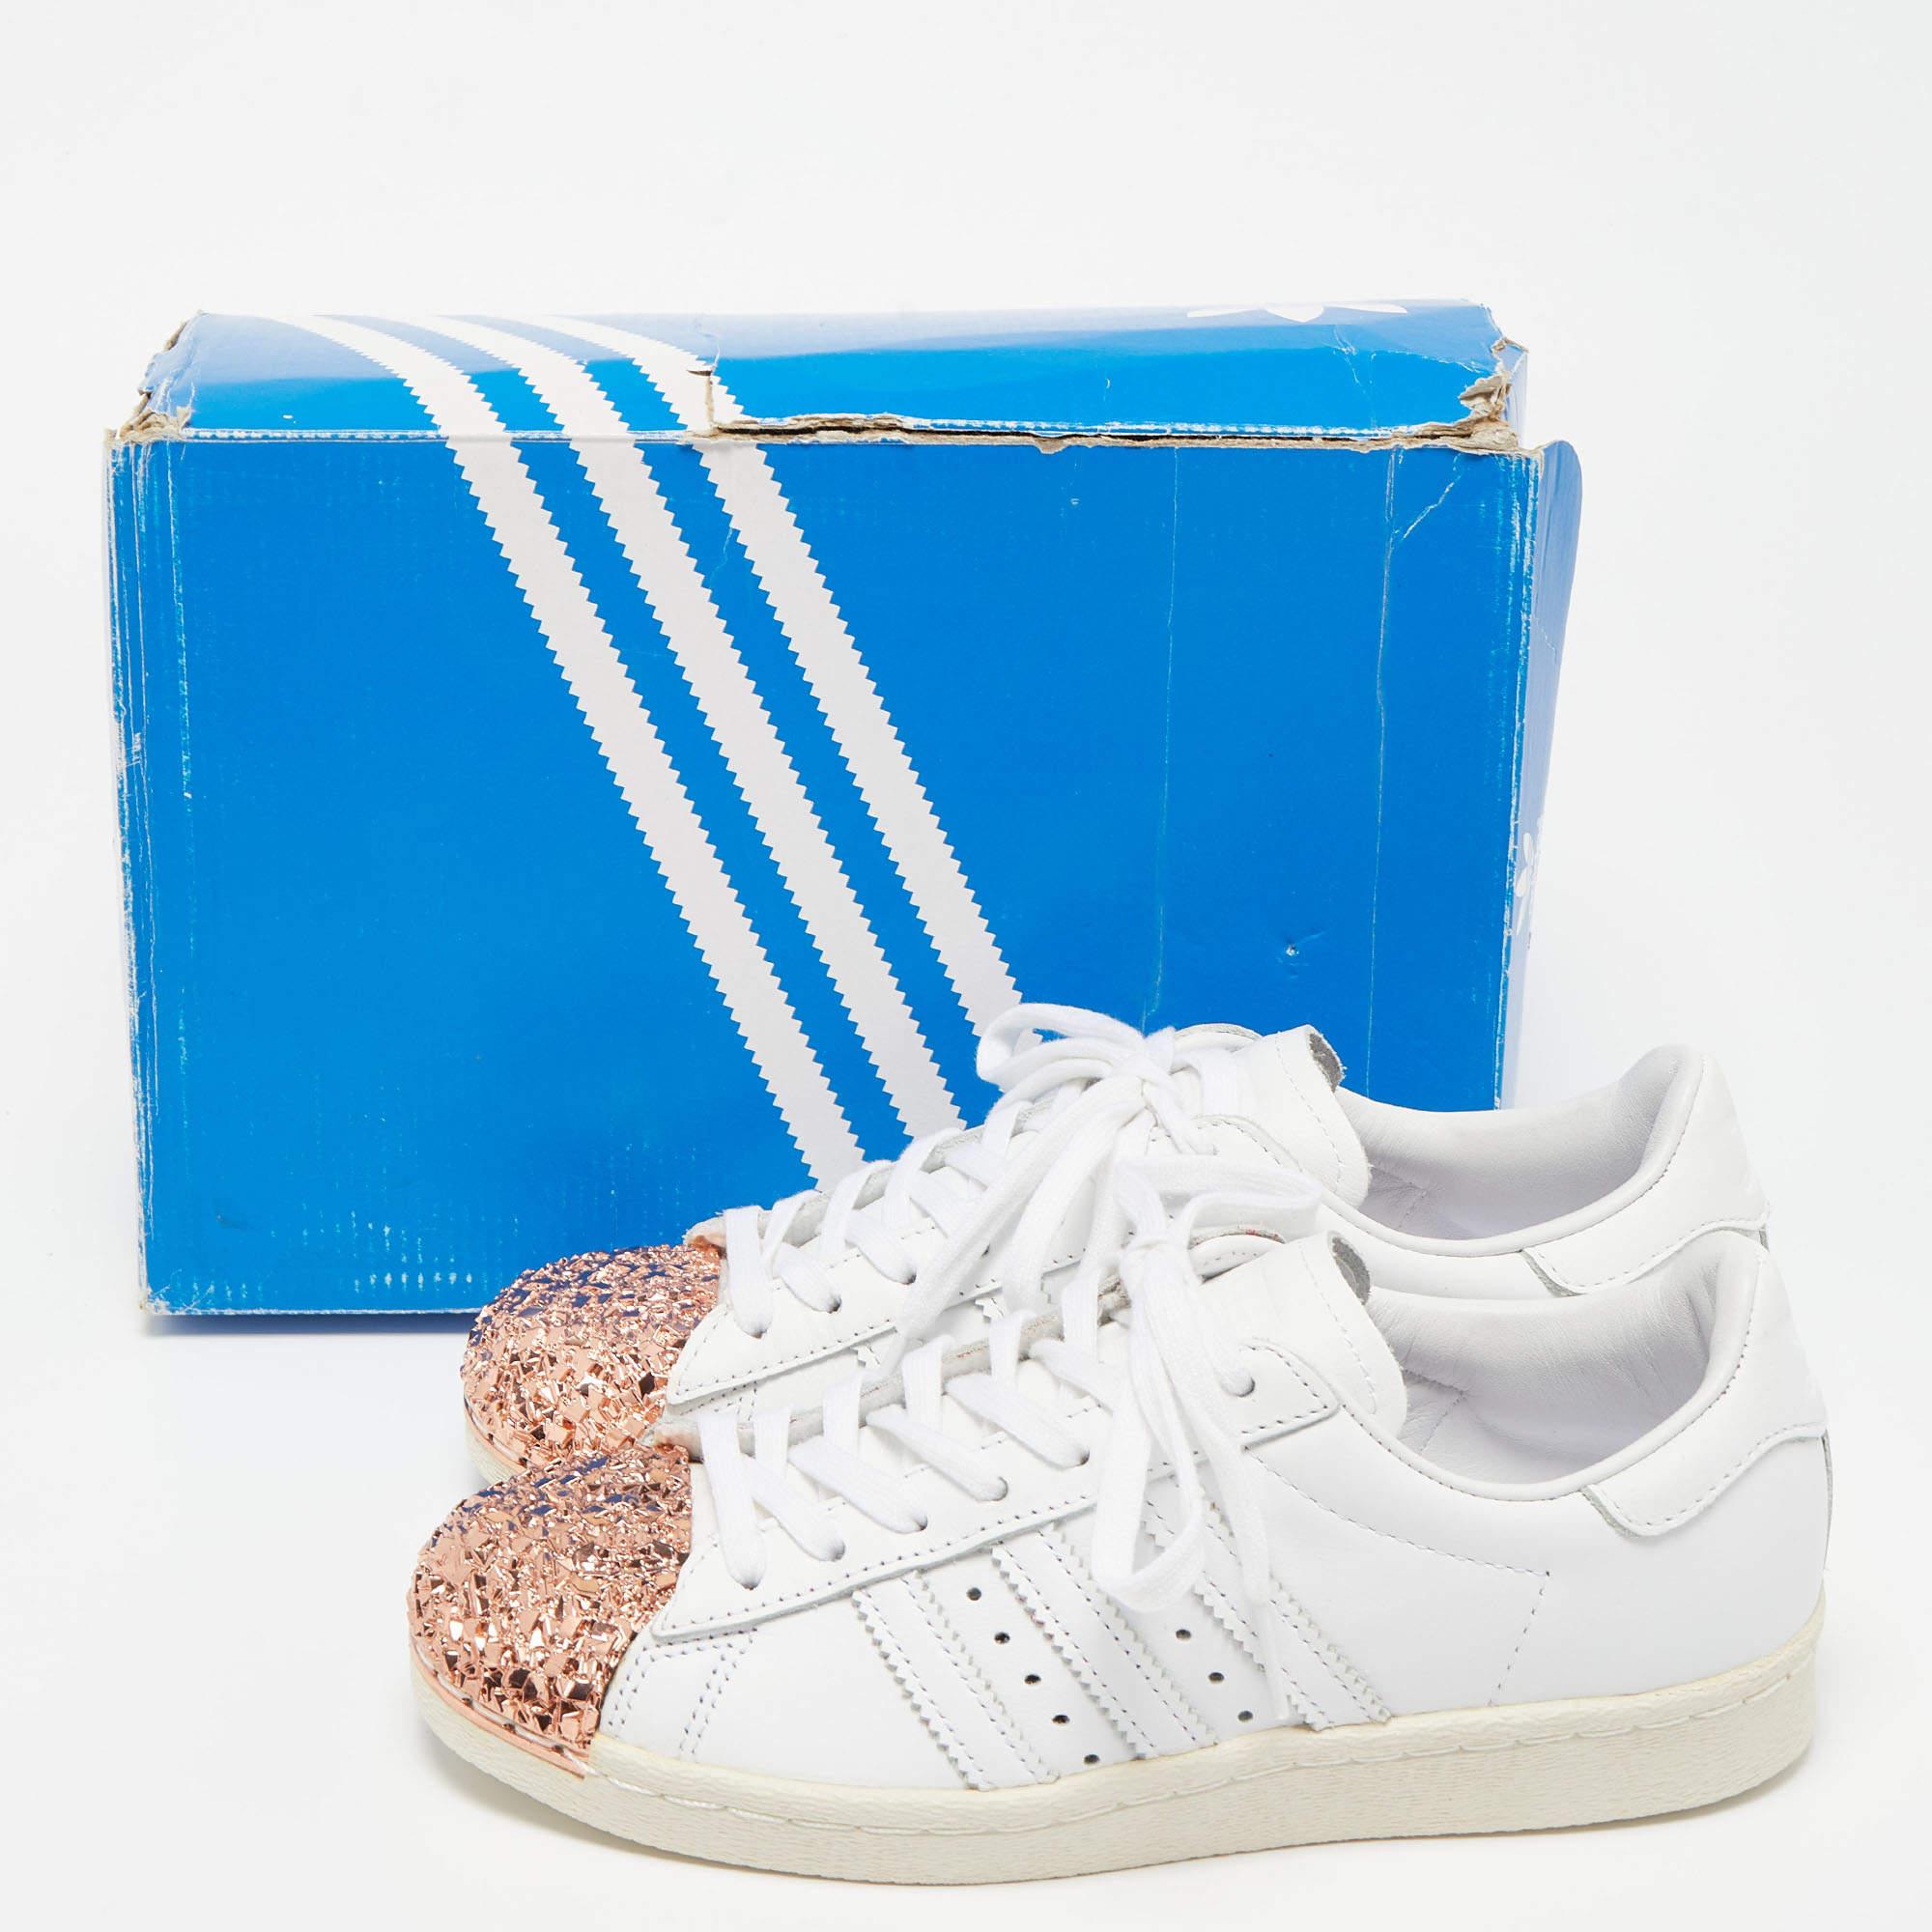 Adidas White/Pink Leather and Metal Superstar Sneakers Size 37.5 3